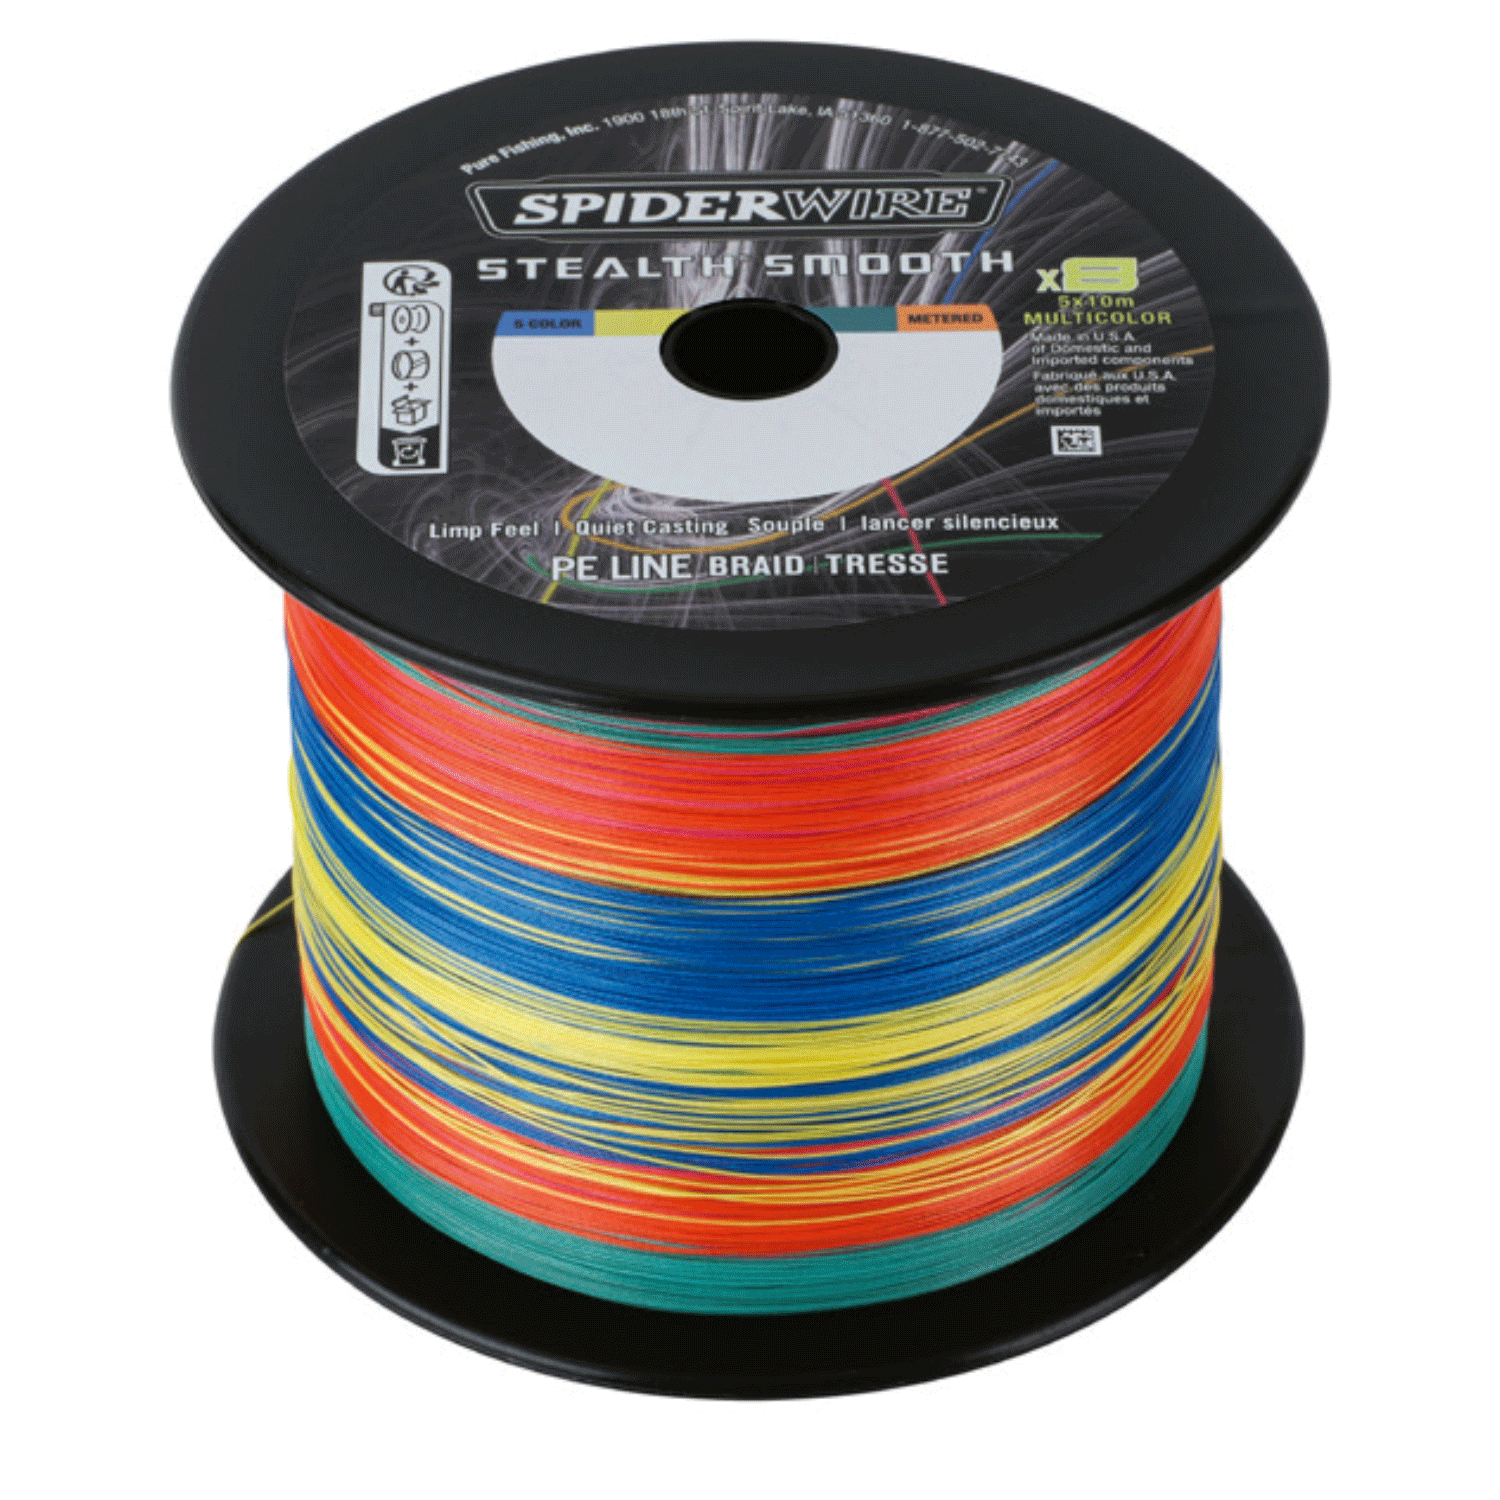 SpiderWire Stealth Smooth8 Braid - Multicolour 2000m : 23.6kg – Glasgow  Angling Centre